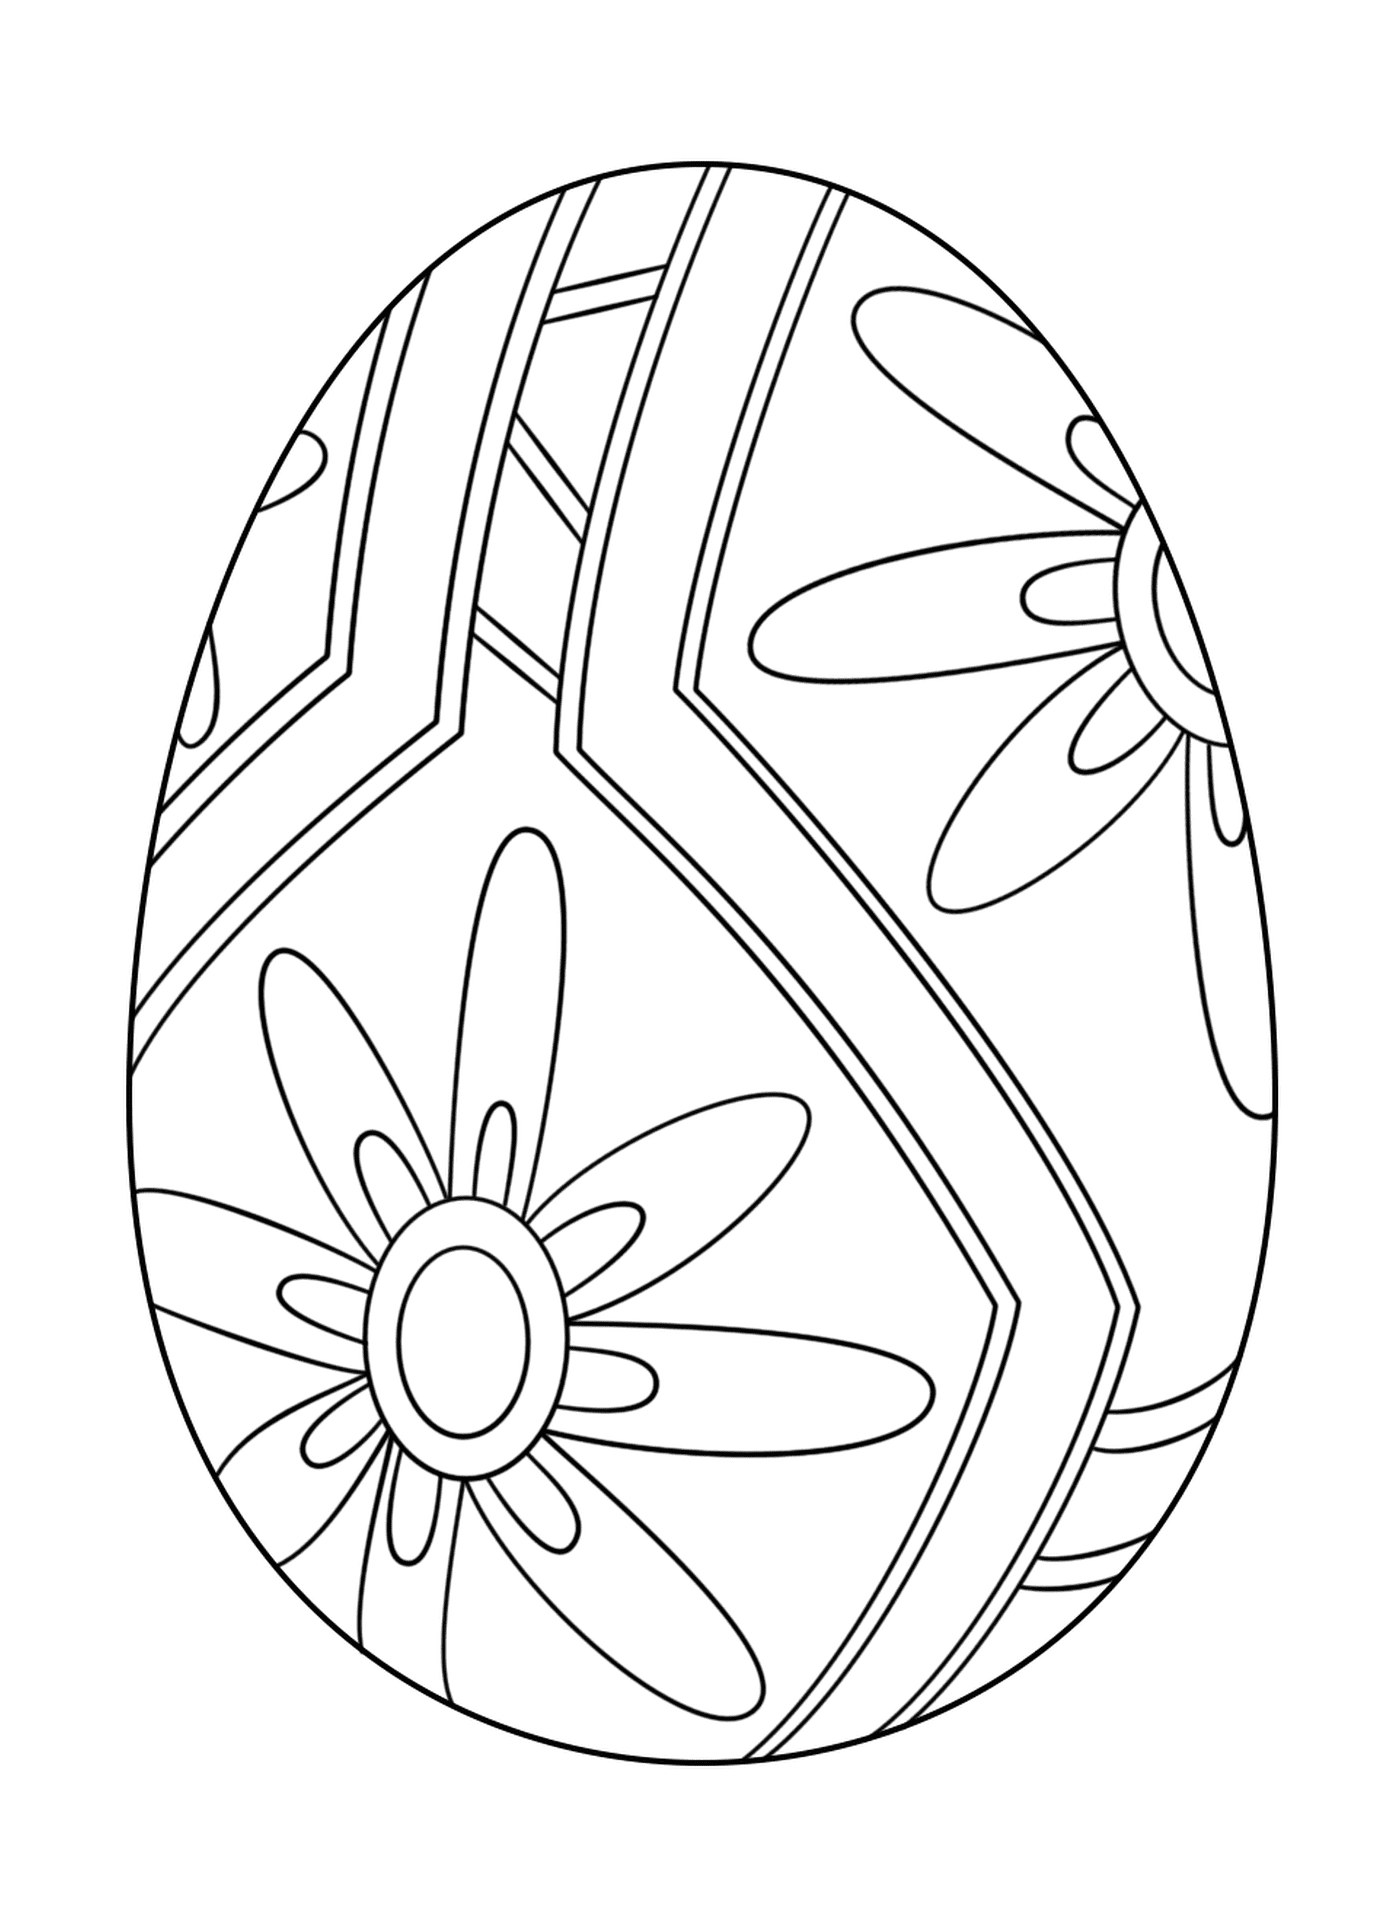  Easter egg with floral pattern 1 